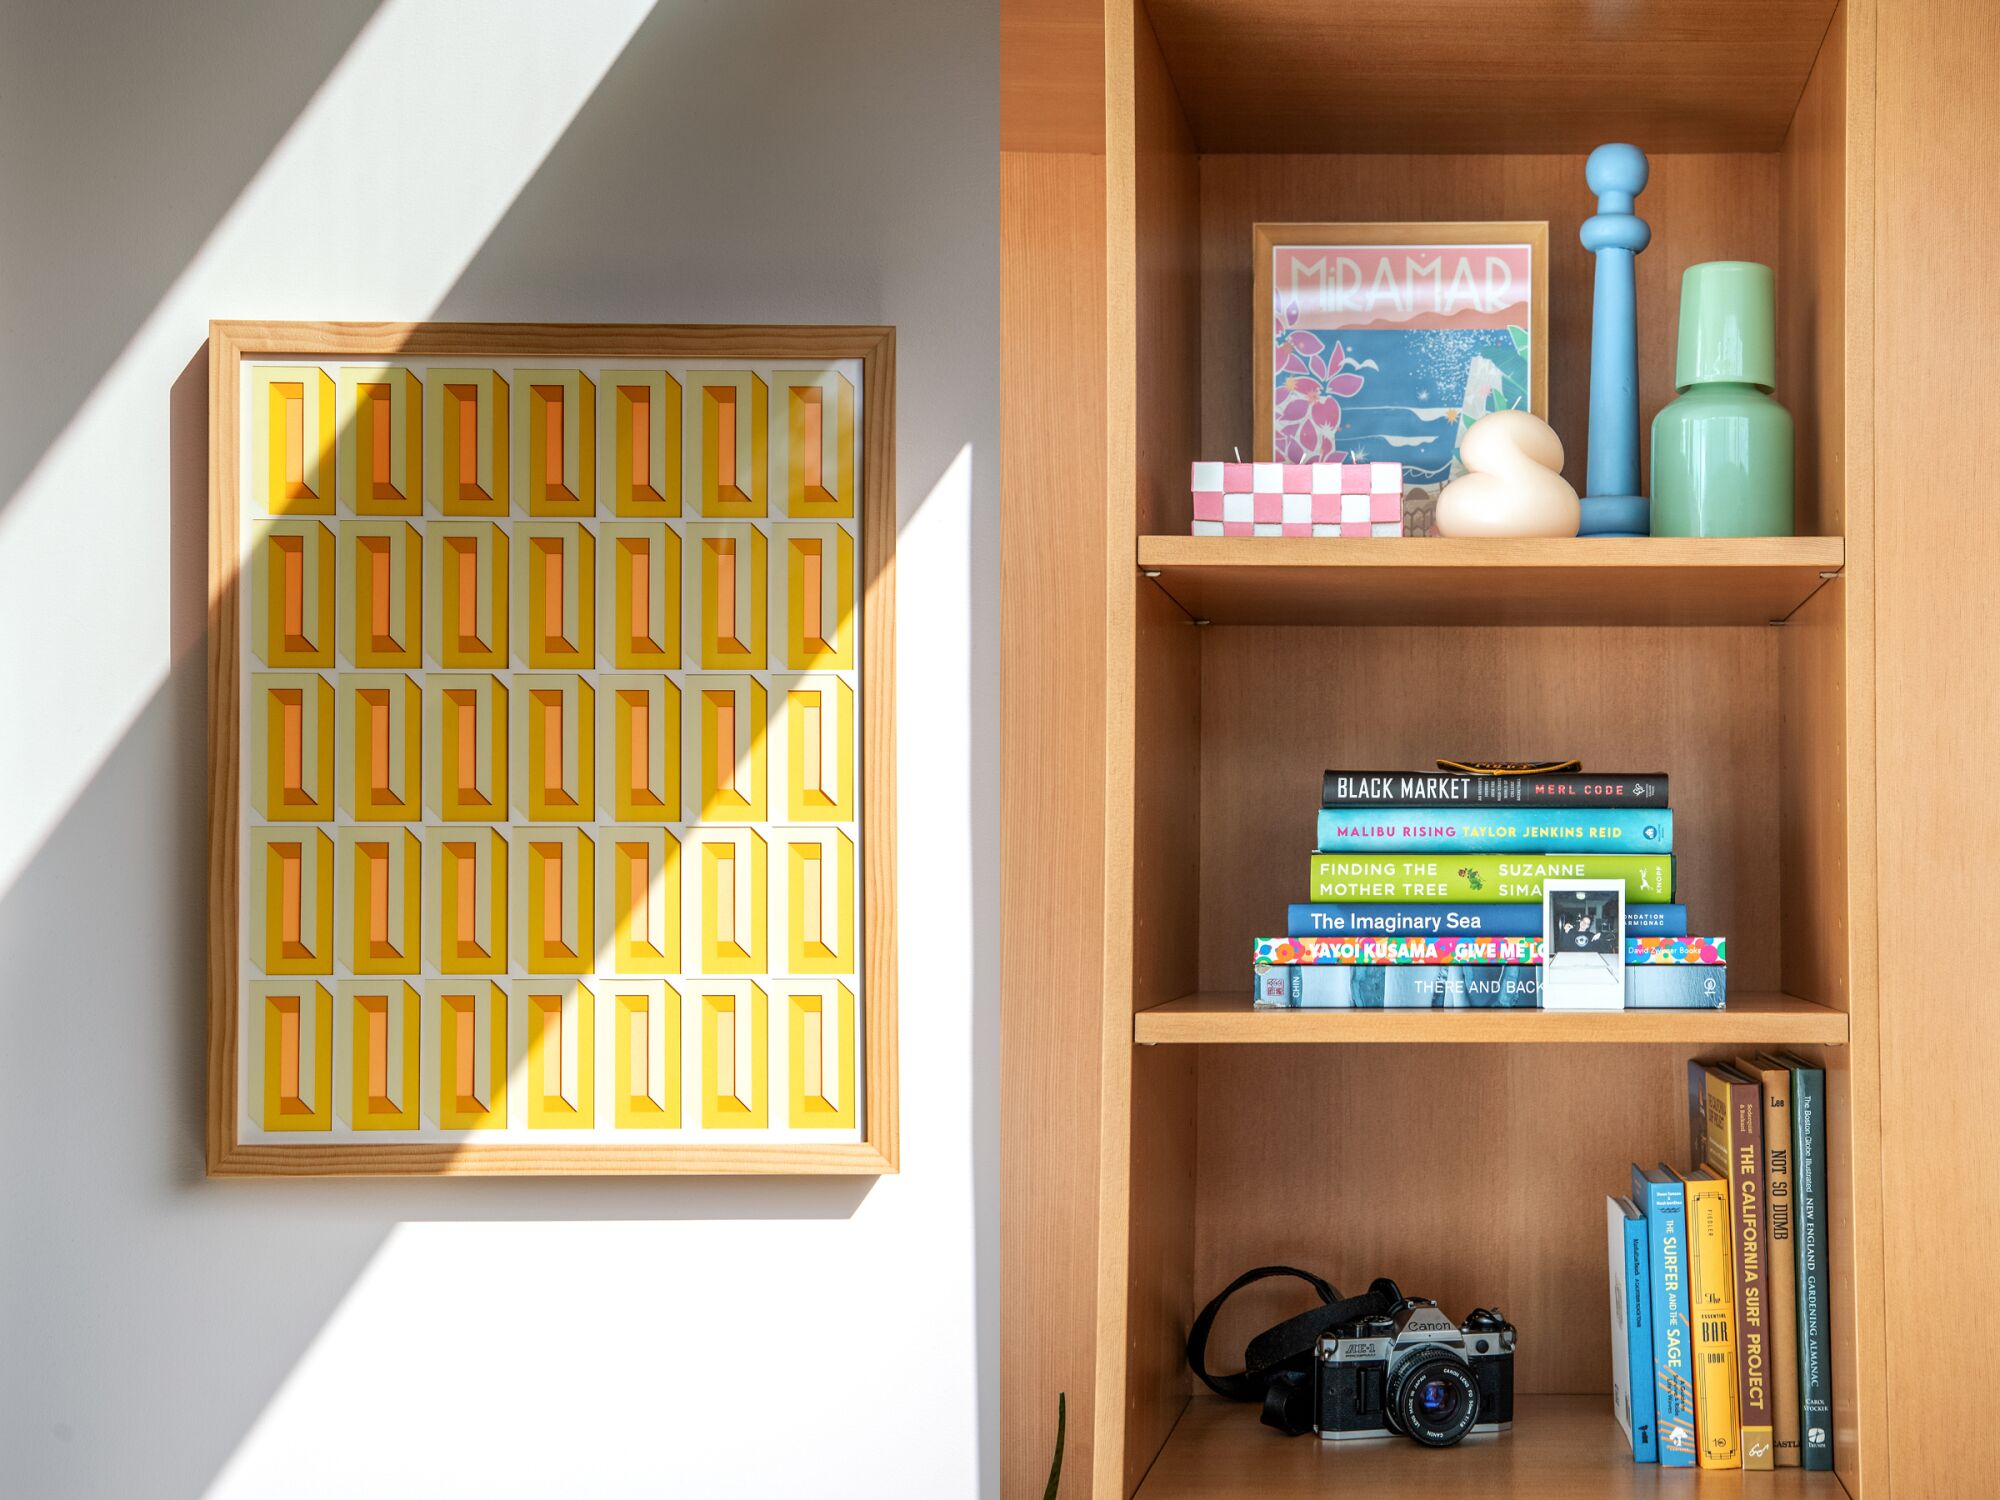 Two photos side by side showing a yellow board on a wall, left, and books and a camera on a shelf, right.